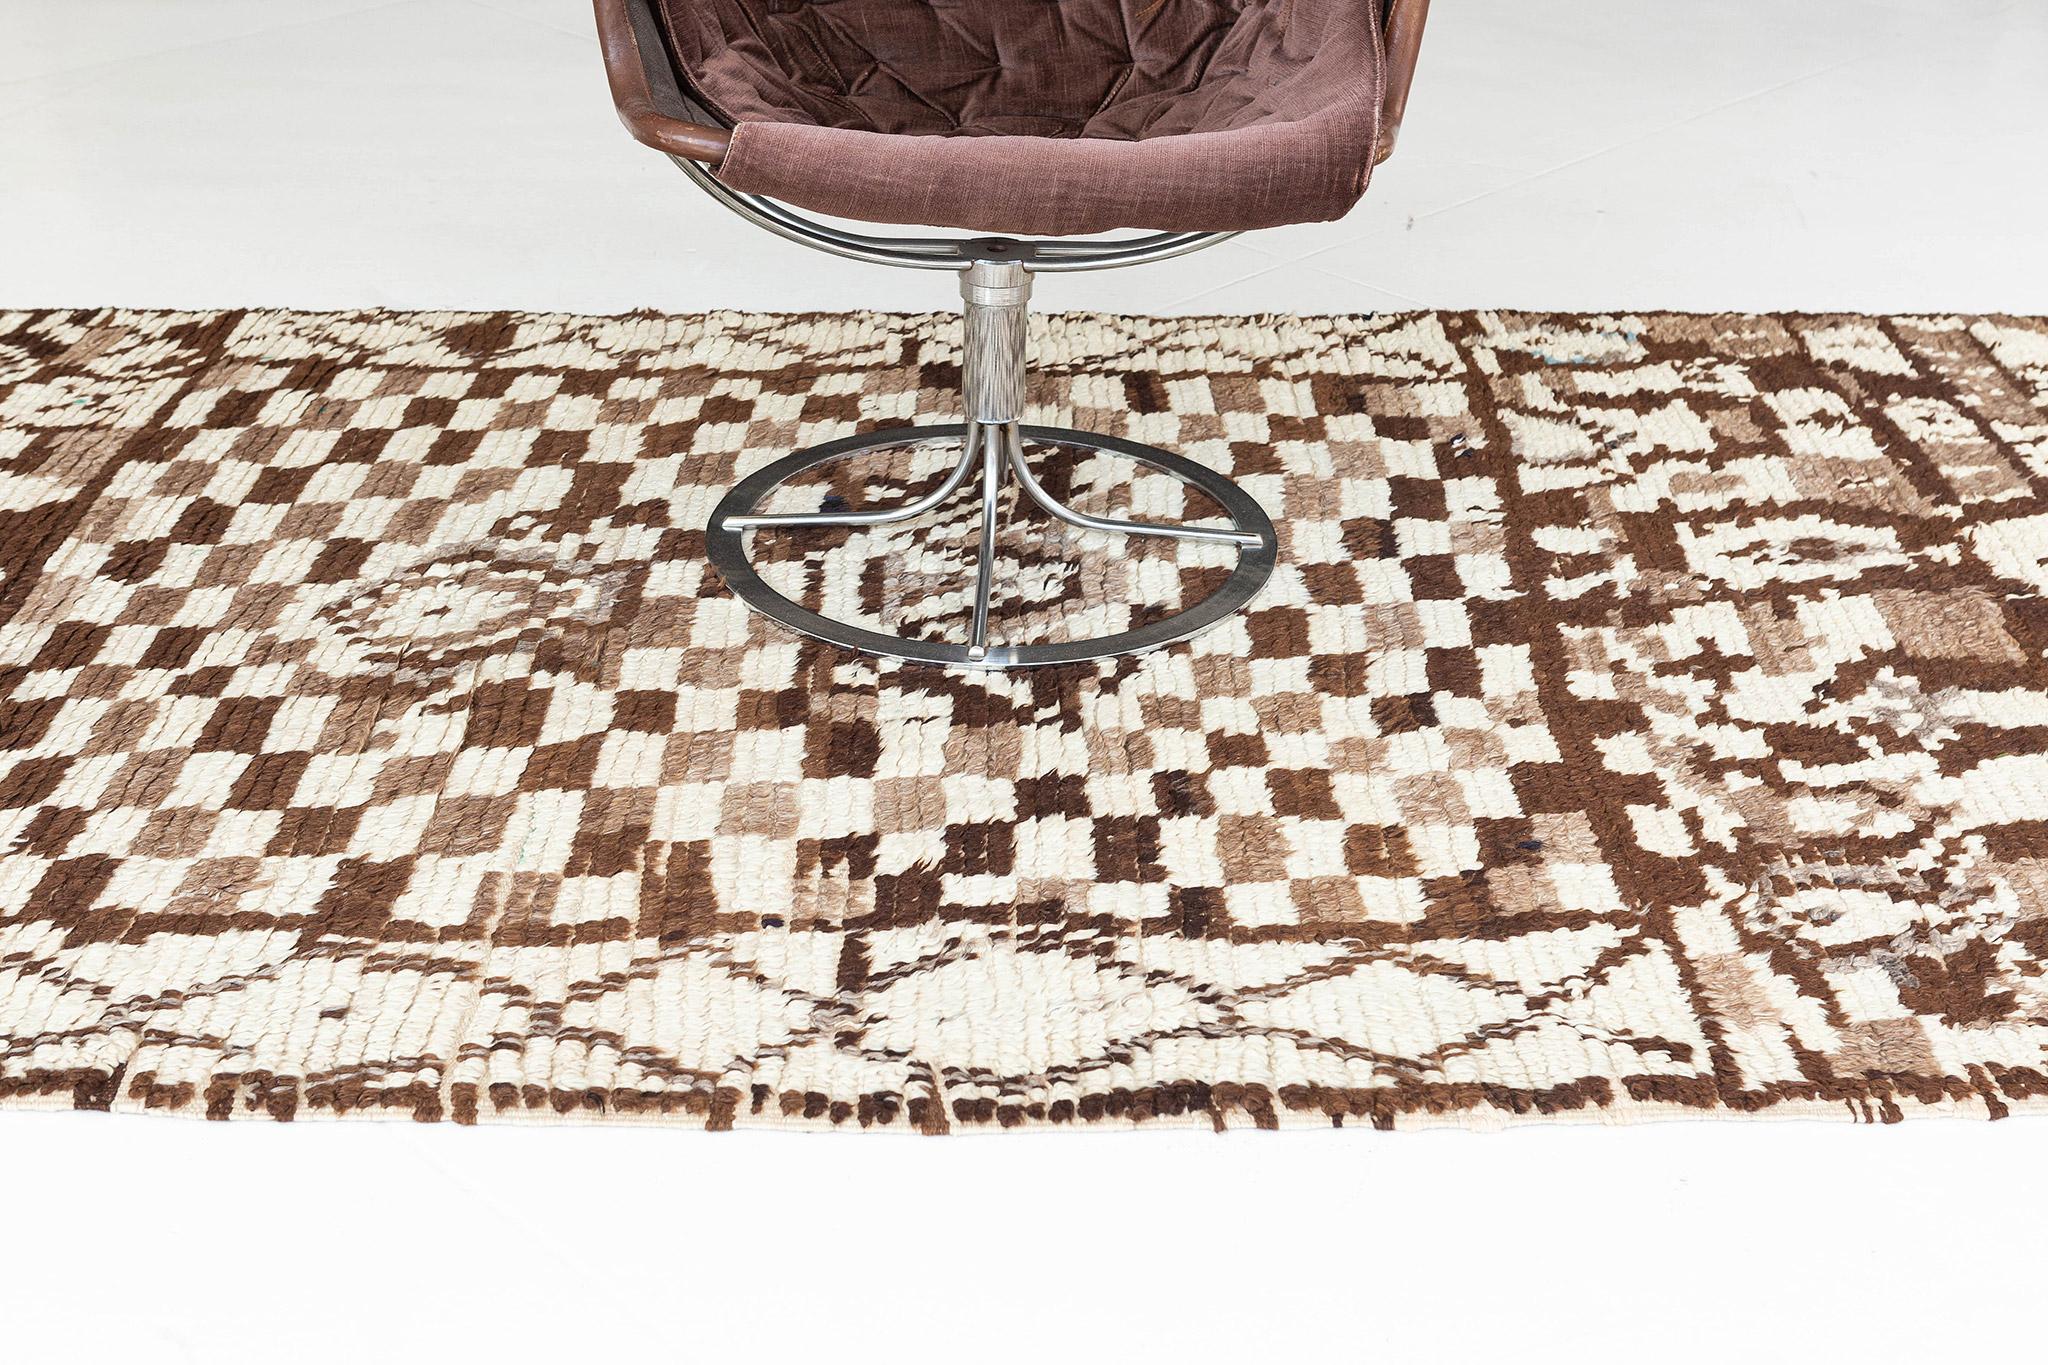 Ivory ground with rectangular compartment areas of rich brown and tan checkerboard patterns and motifs. This densely filled rug has a feeling of eccentric order. Taking cues from formal rugs as evidenced by the symmetrical composition and central